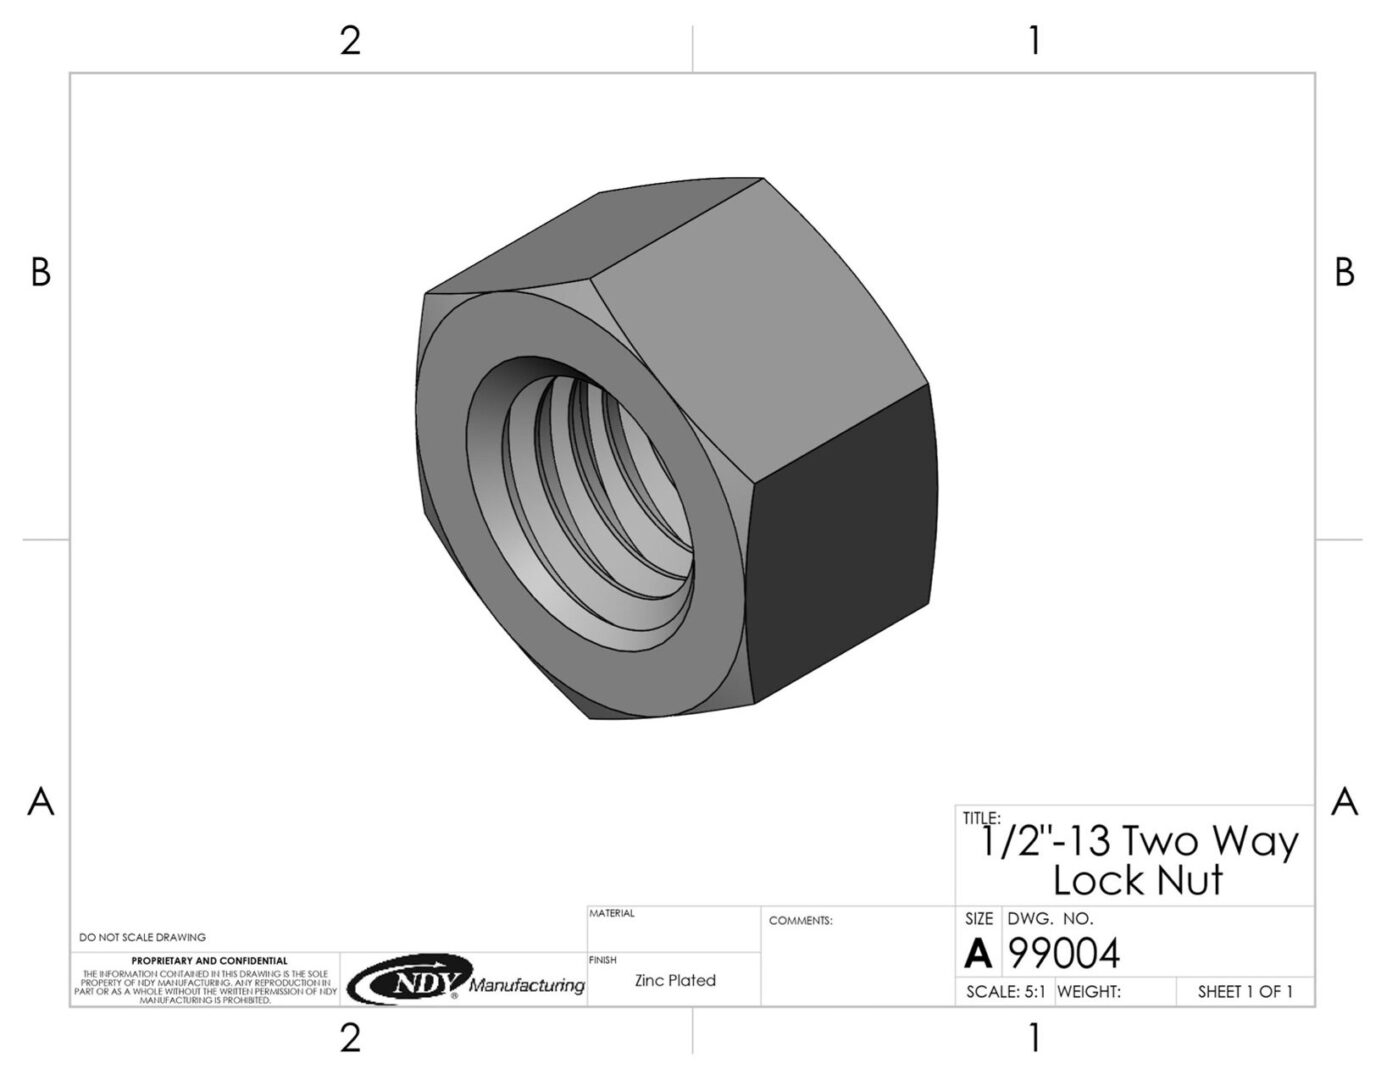 A drawing of a 1/2"-13 Two Way Lock Nut, Center Lock.